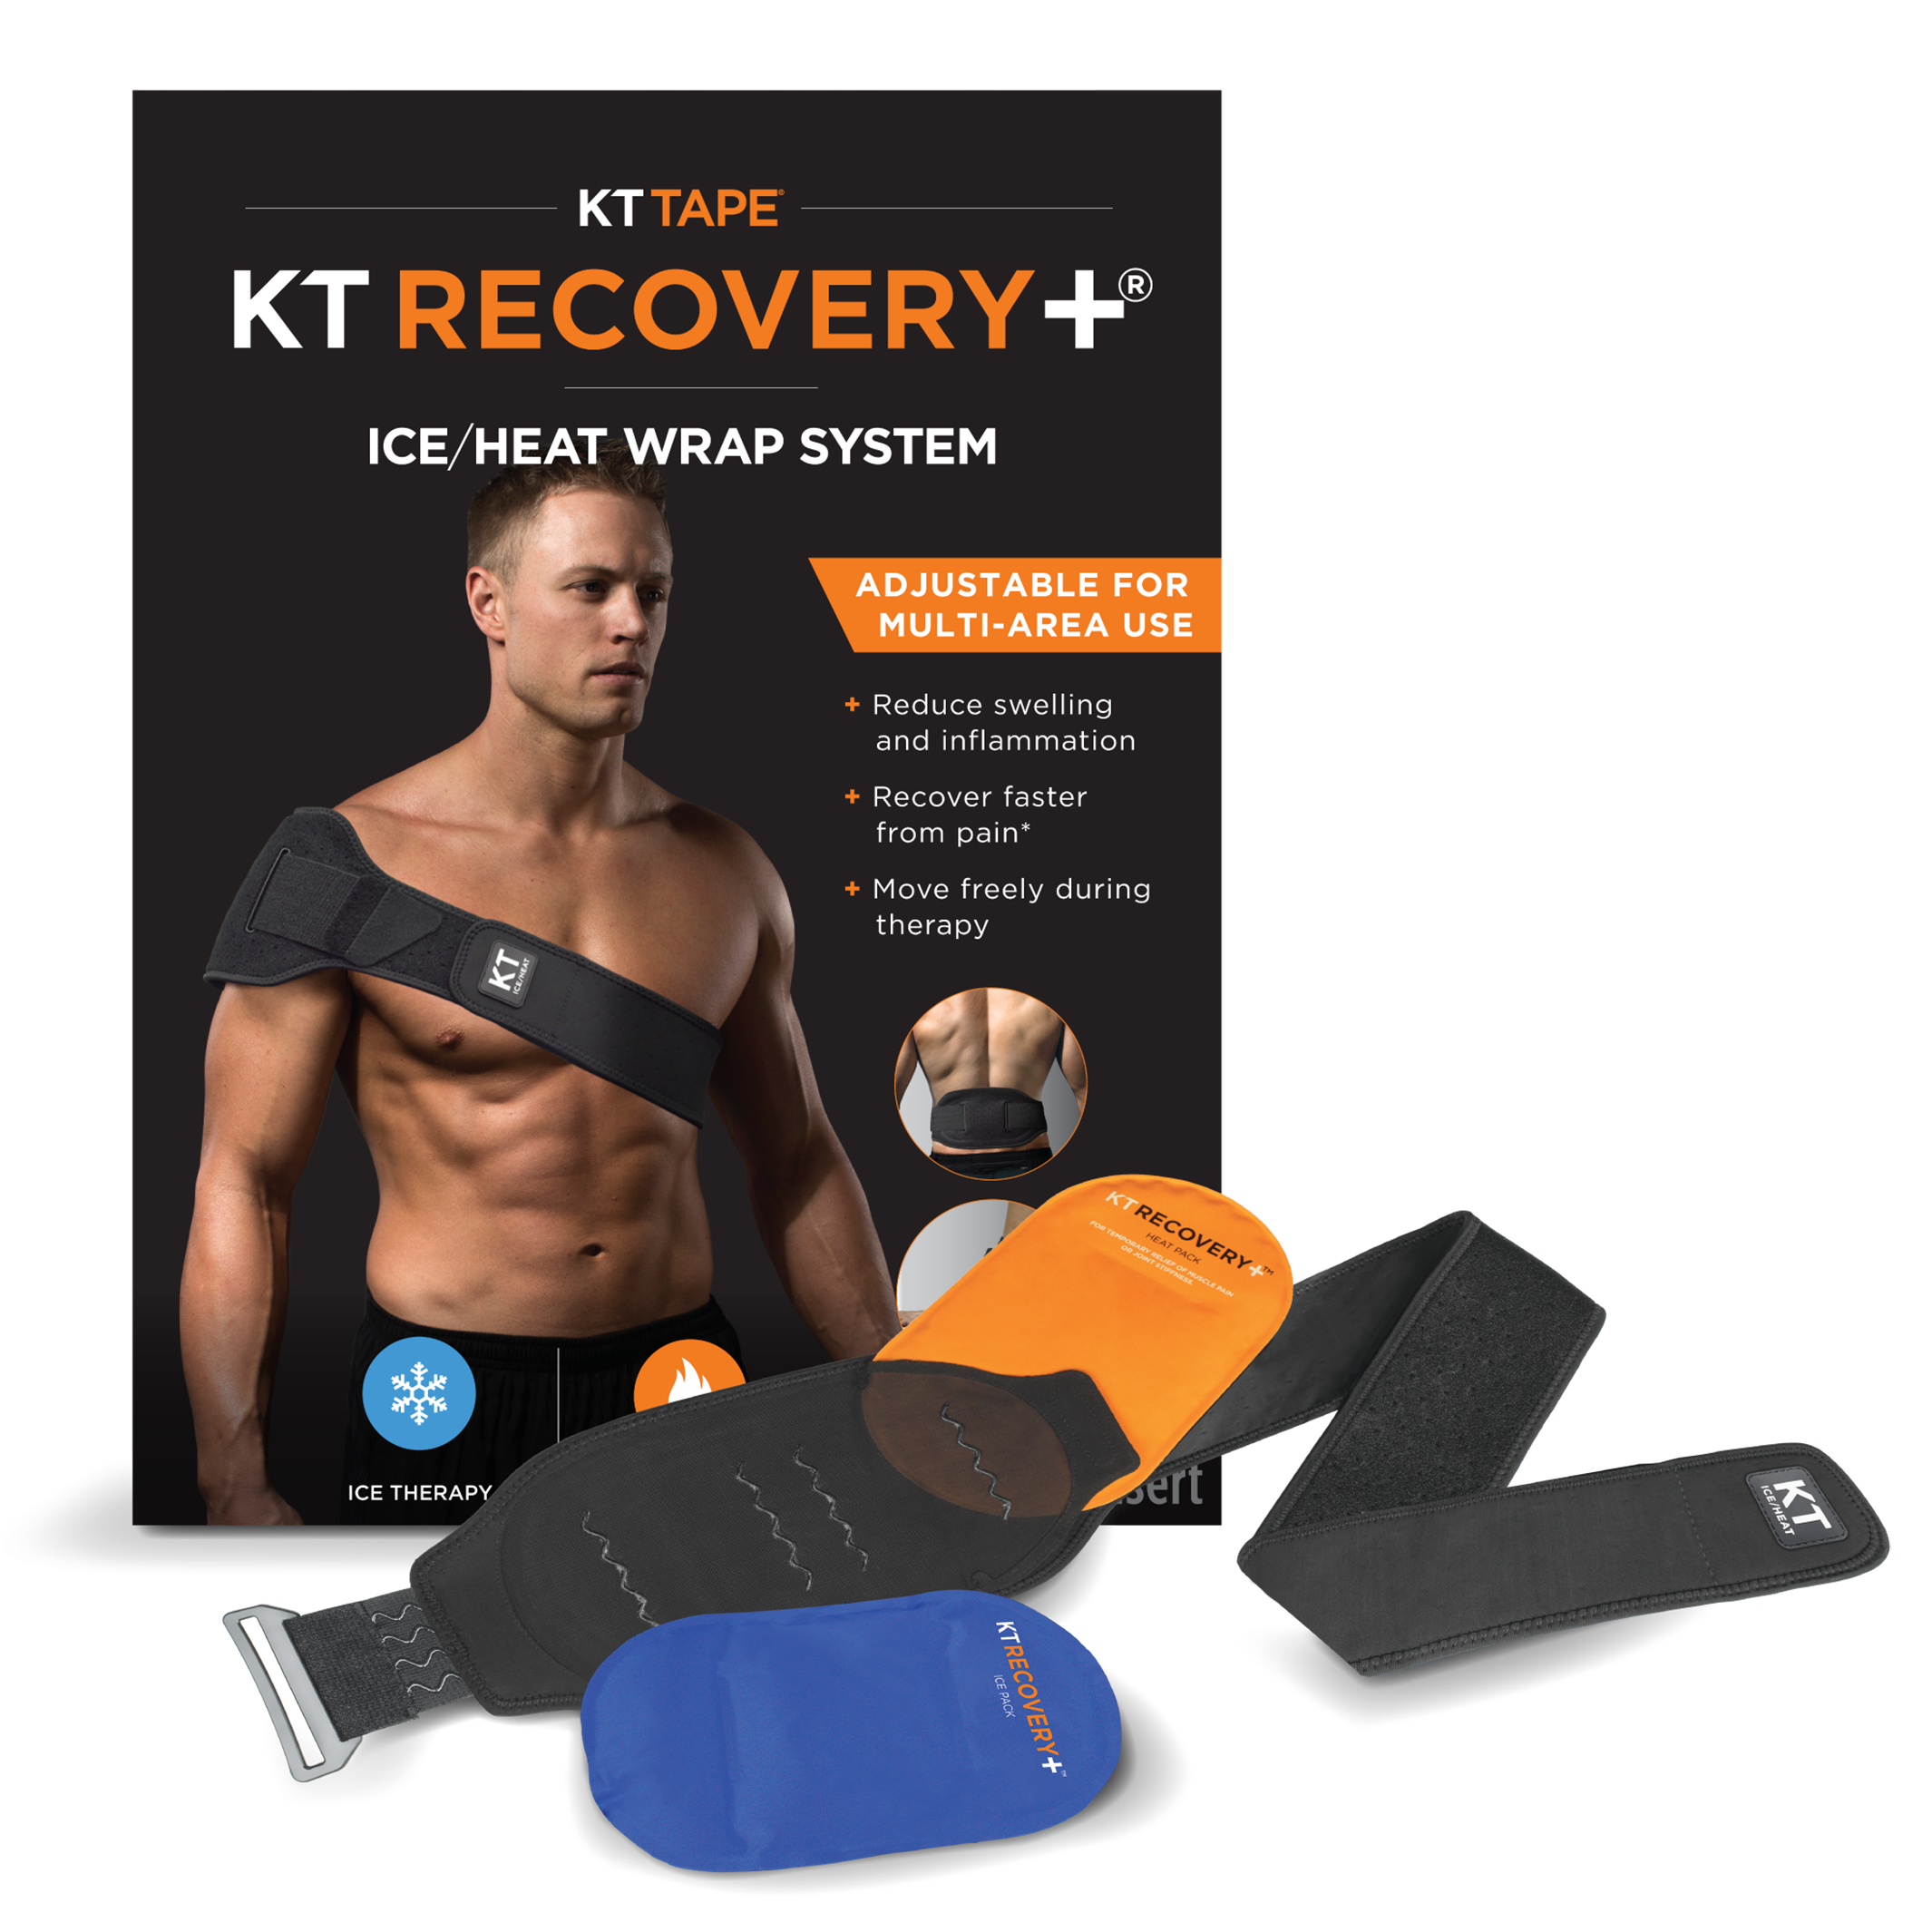 KT Recovery+® Ice/Heat Wrap